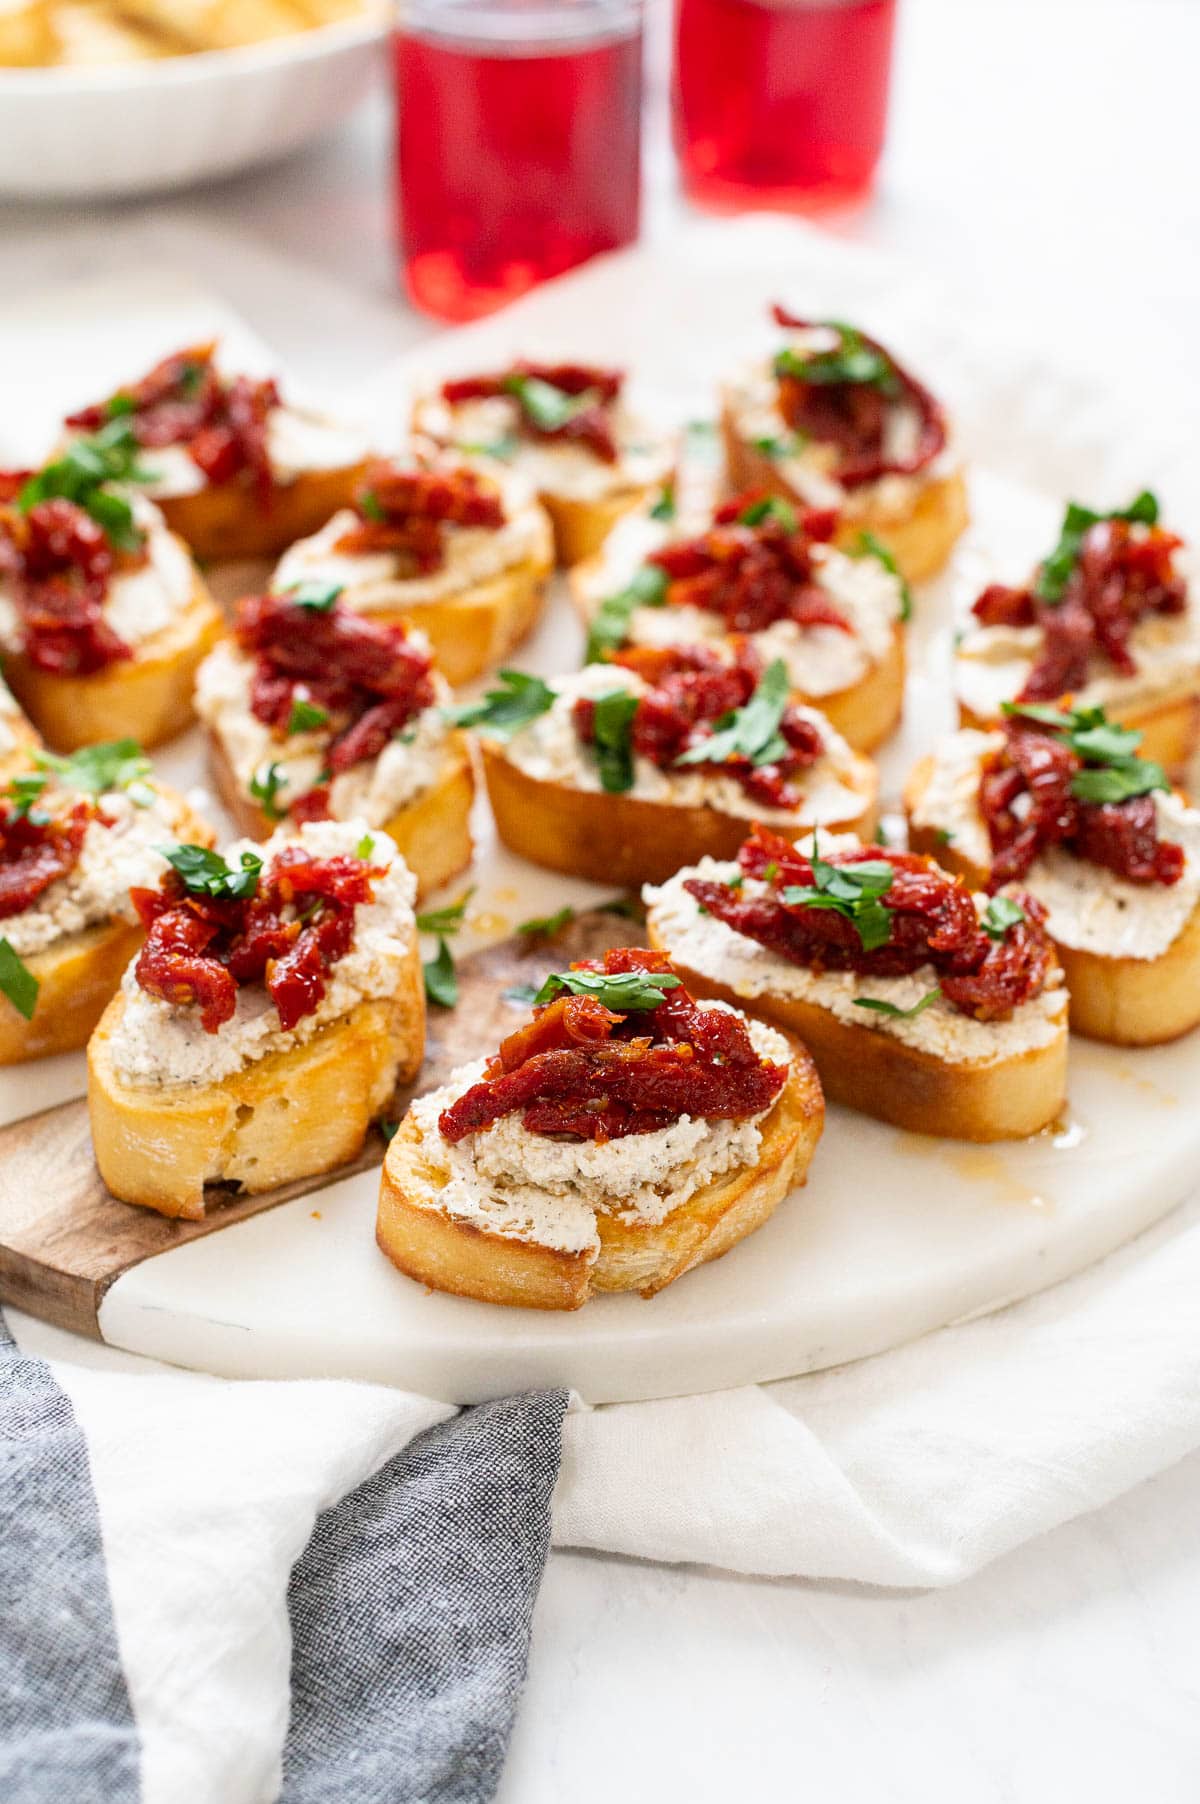 Crostinis served with sun dried tomatoes and parsley.